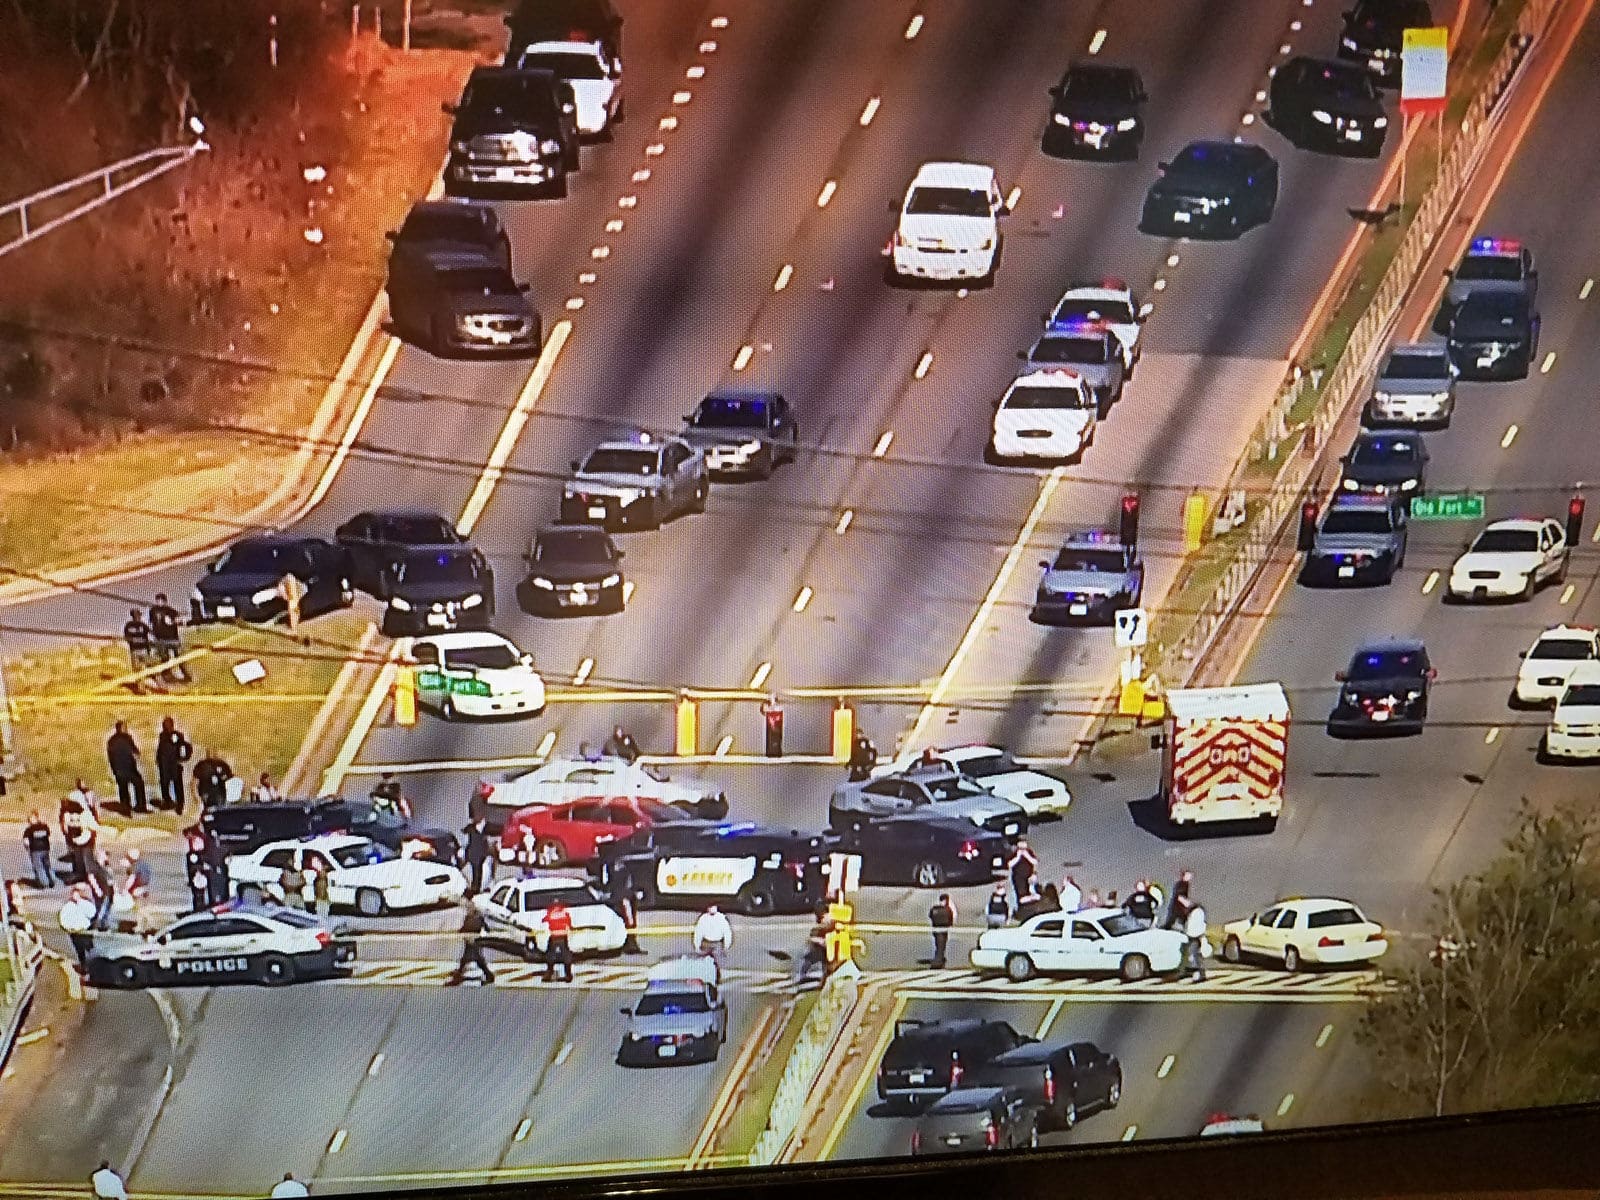 Scene of a police investigation that has shutdown traffic on MD-210, Indian Head Highway, in Prince George's County, Maryland. (Courtesy NBC4)